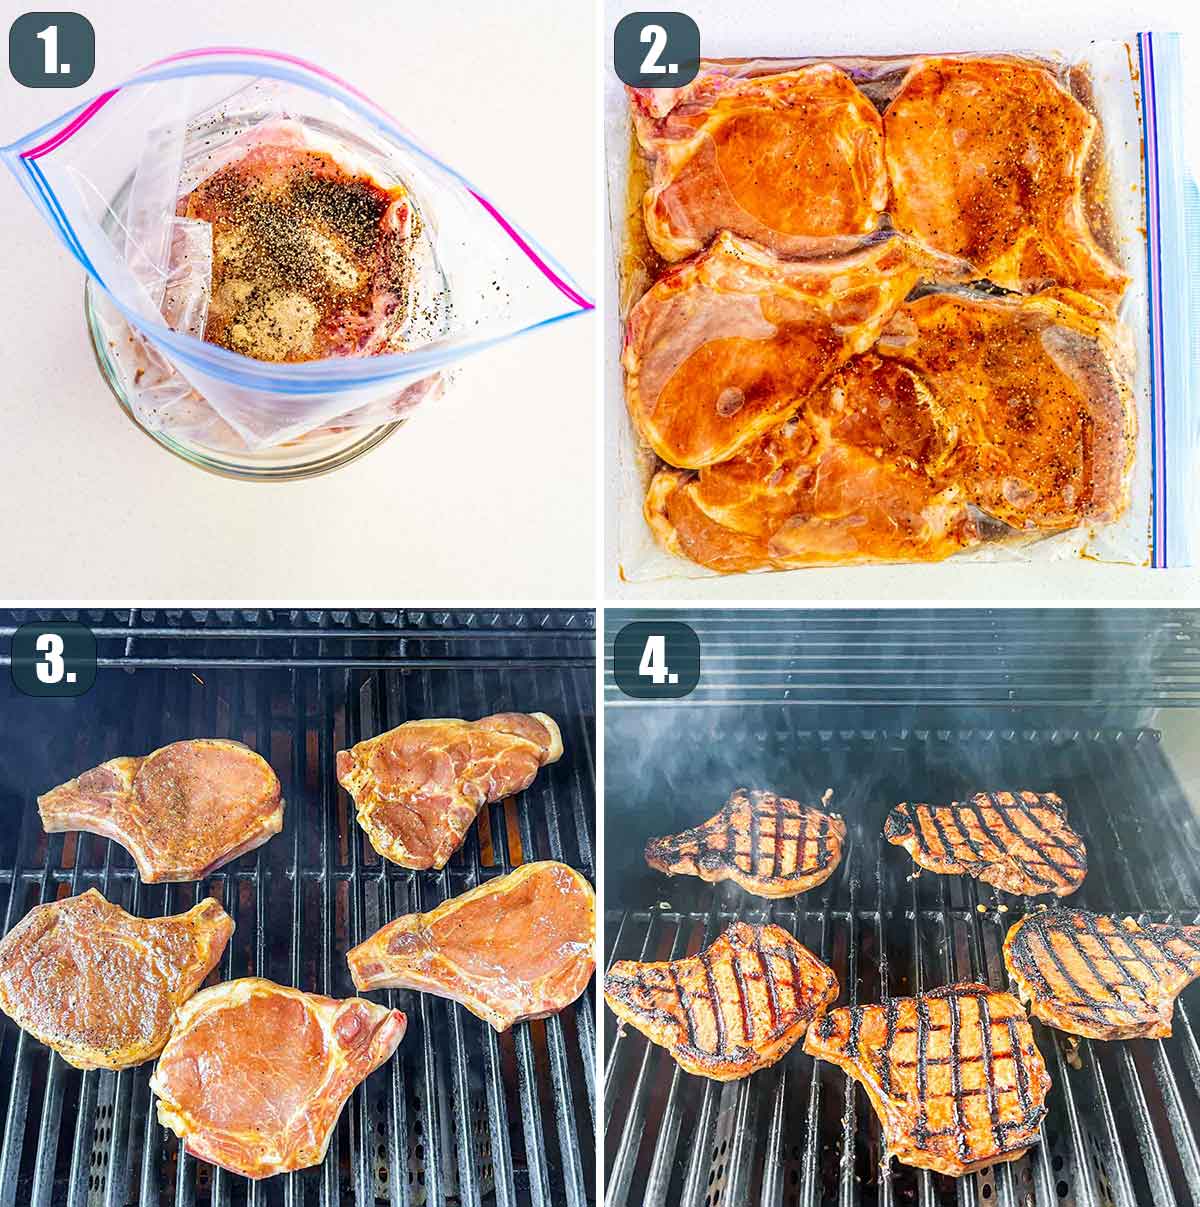 process shots showing how to marinate and grill pork chops.